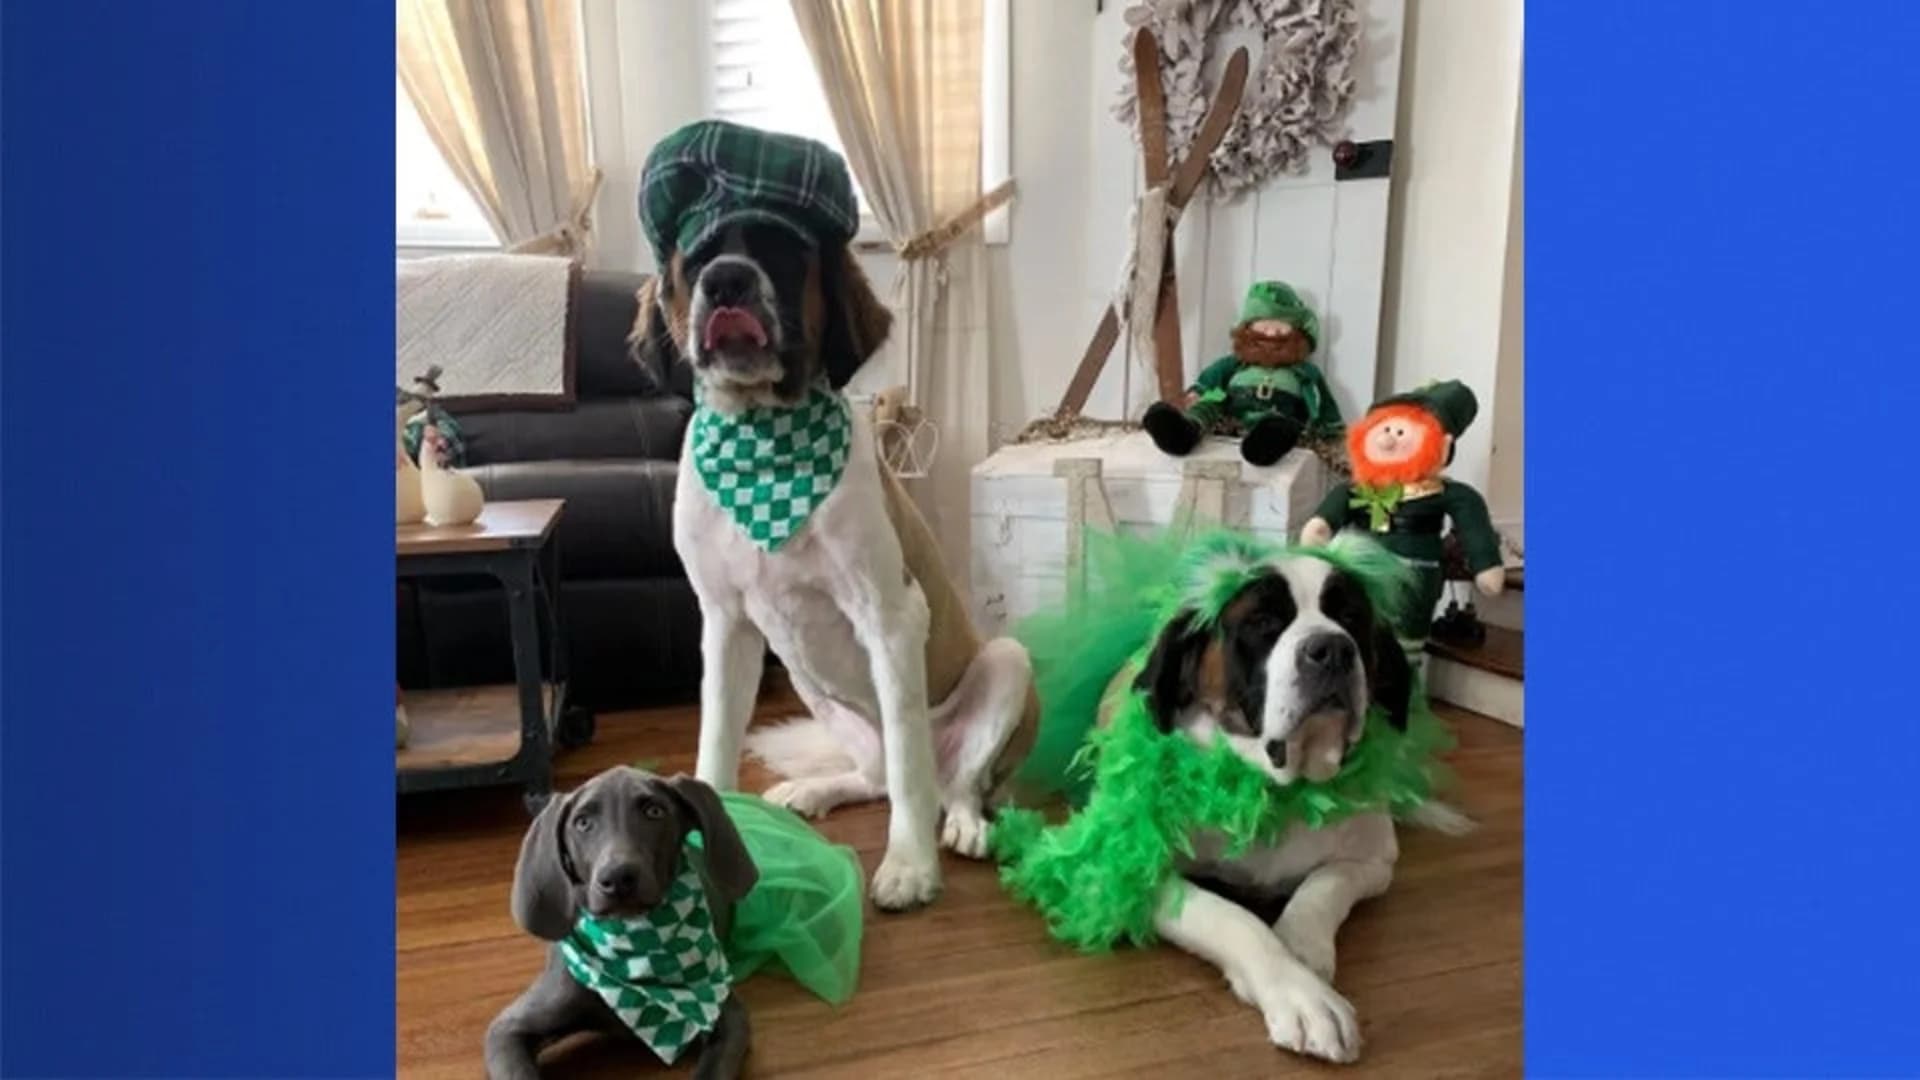 Your 2020 Long Island St. Patrick's Day Photos